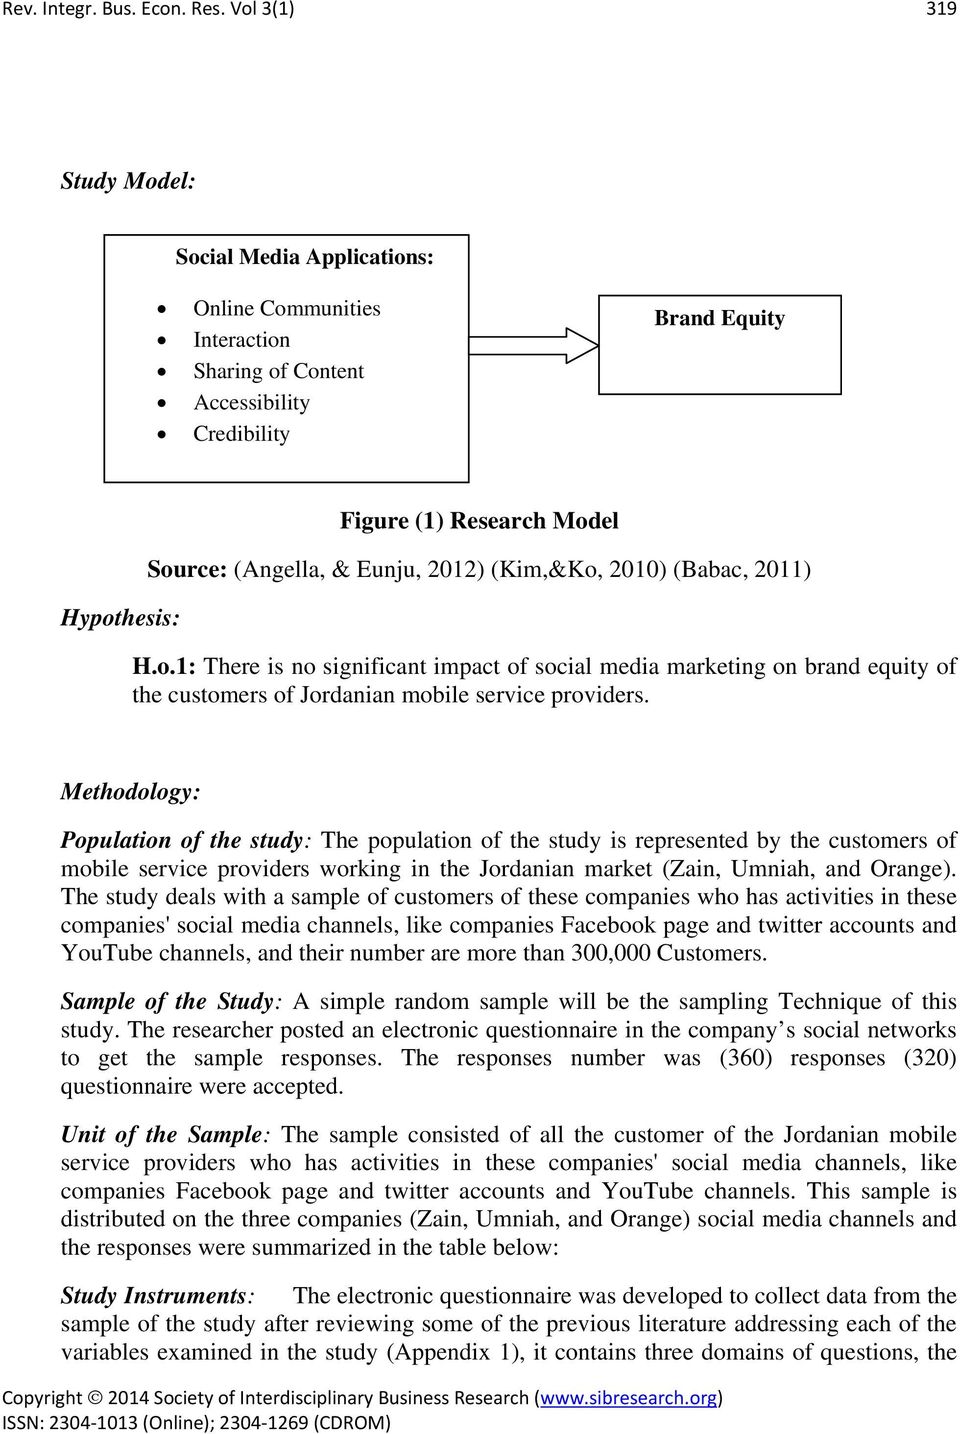 Eunju, 2012) (Kim,&Ko, 2010) (Babac, 2011) H.o.1: There is no significant impact of social media marketing on brand equity of the customers of Jordanian mobile service providers.